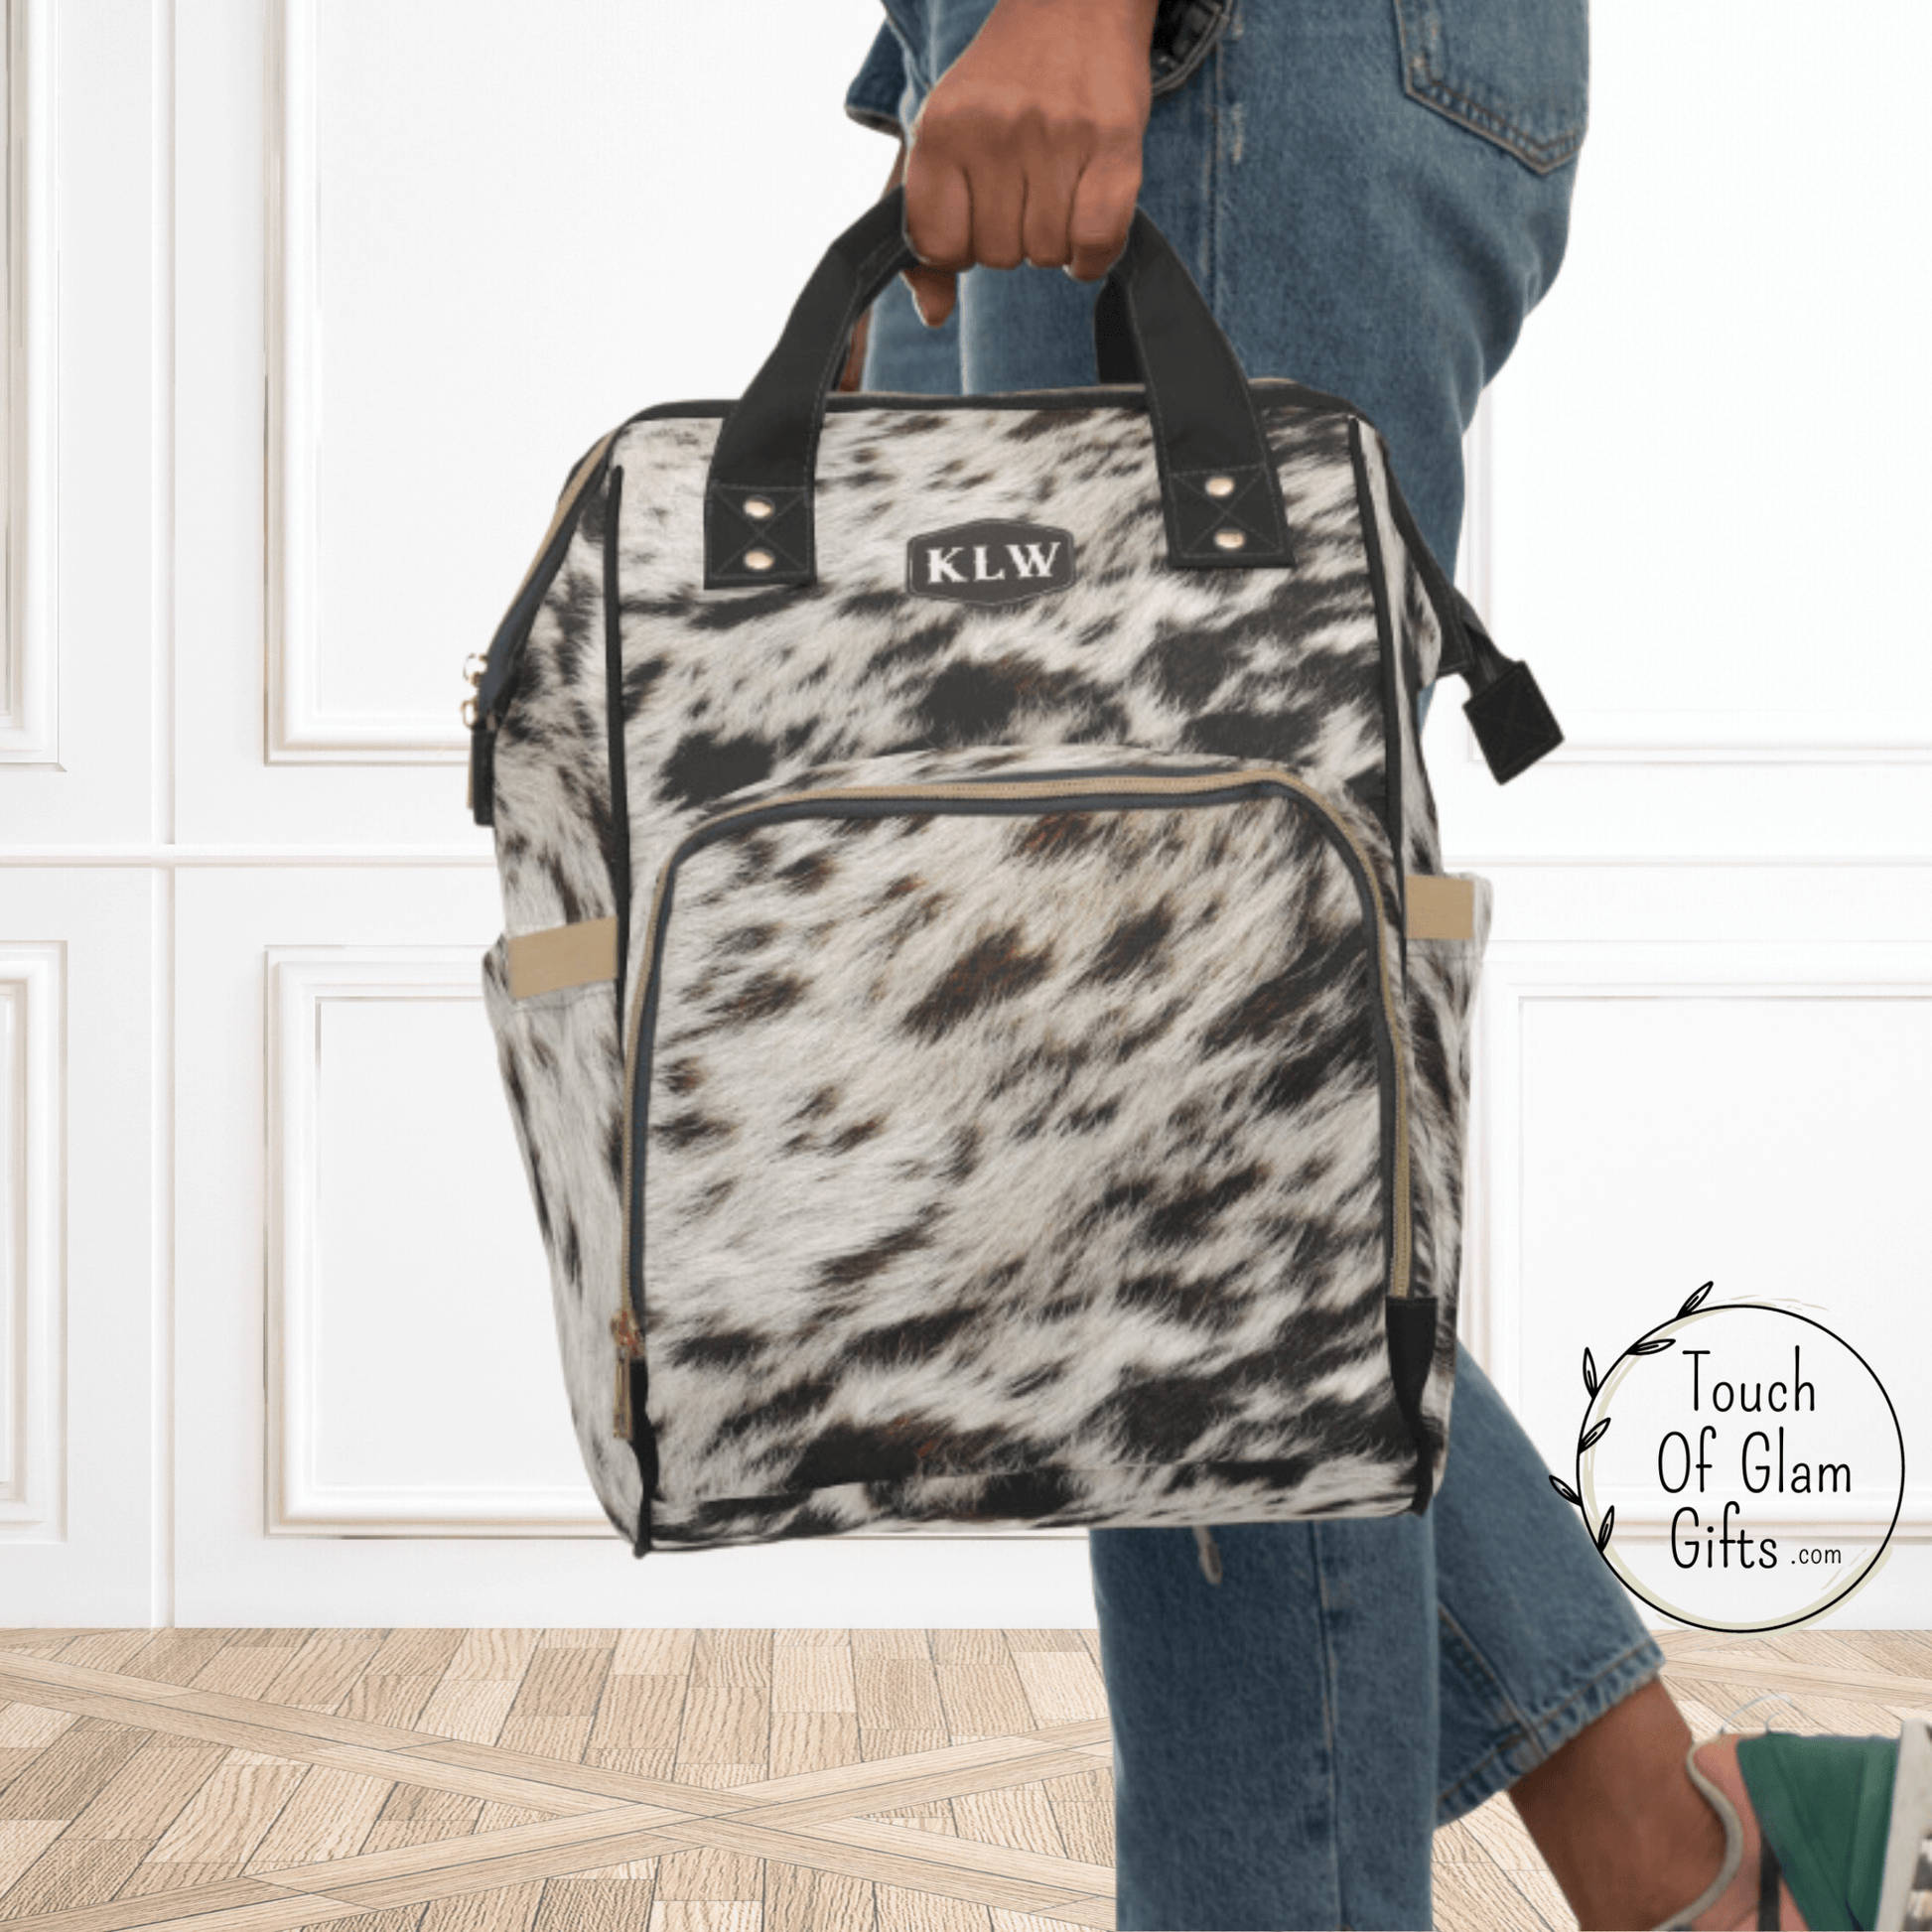 The cowhide backpack has large carrying handles for easy carrying capabilities.